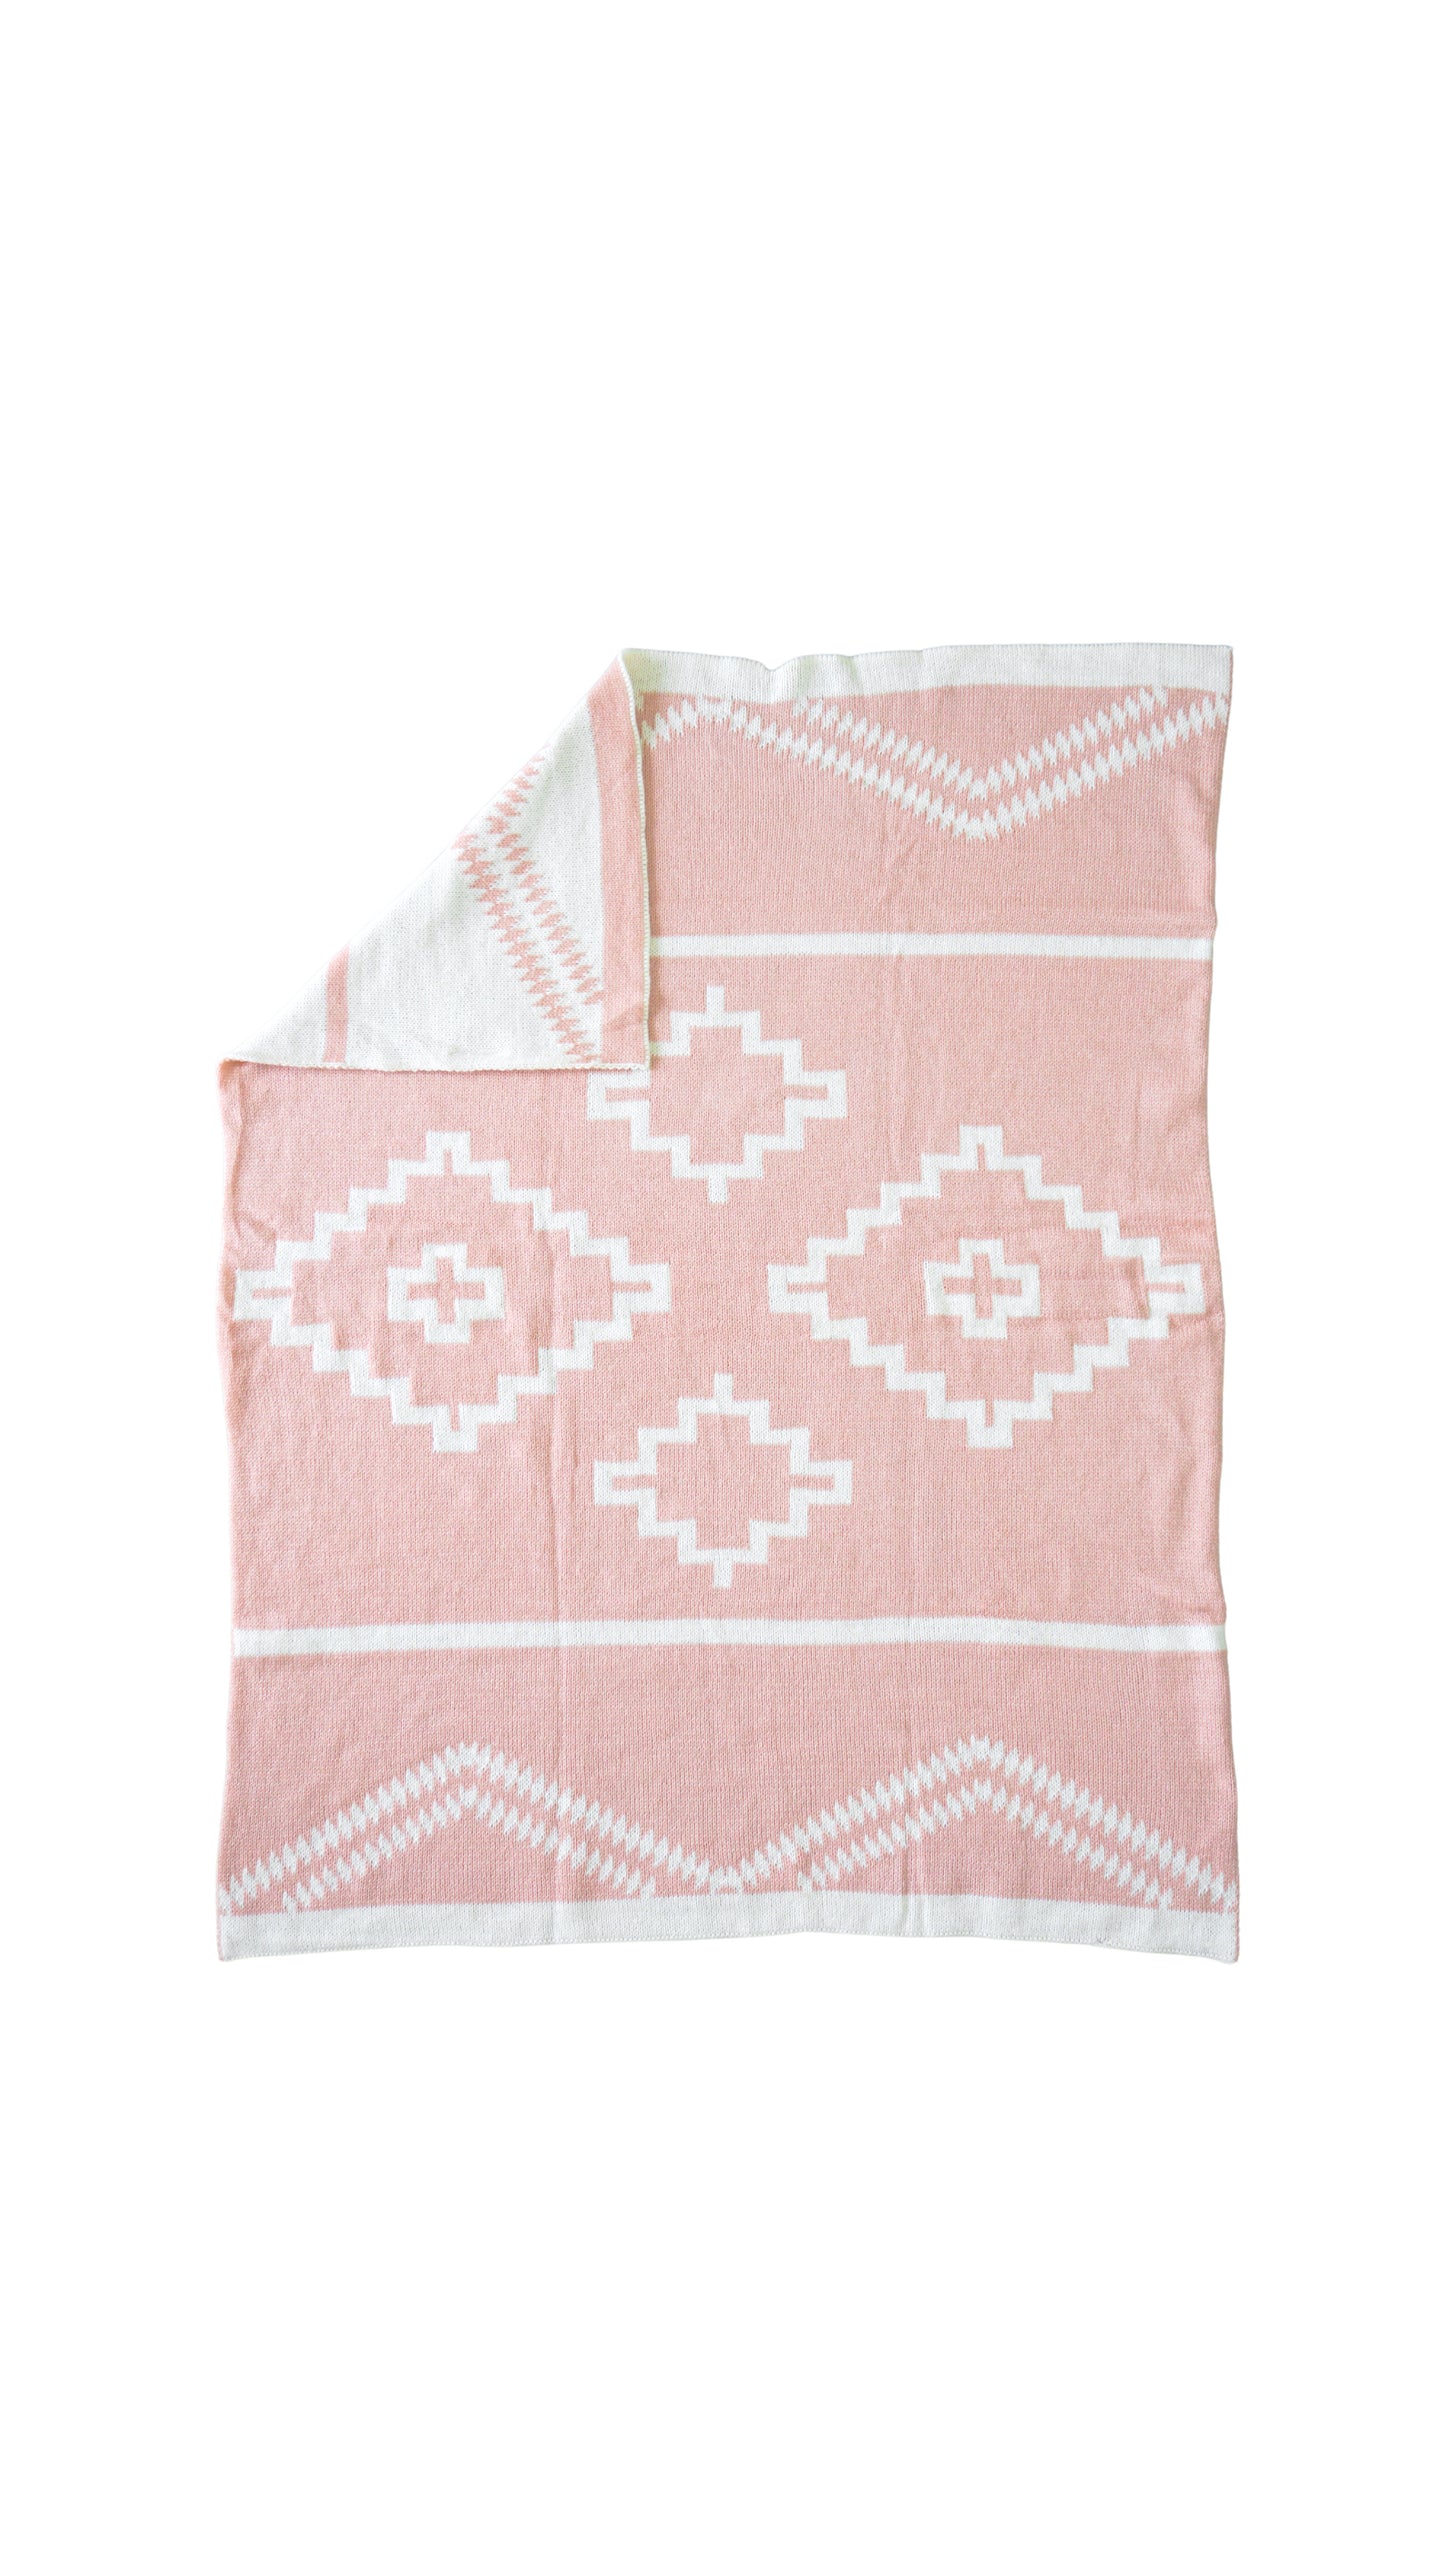 BABY PINK ALPINE BLANKET (Retired Product)